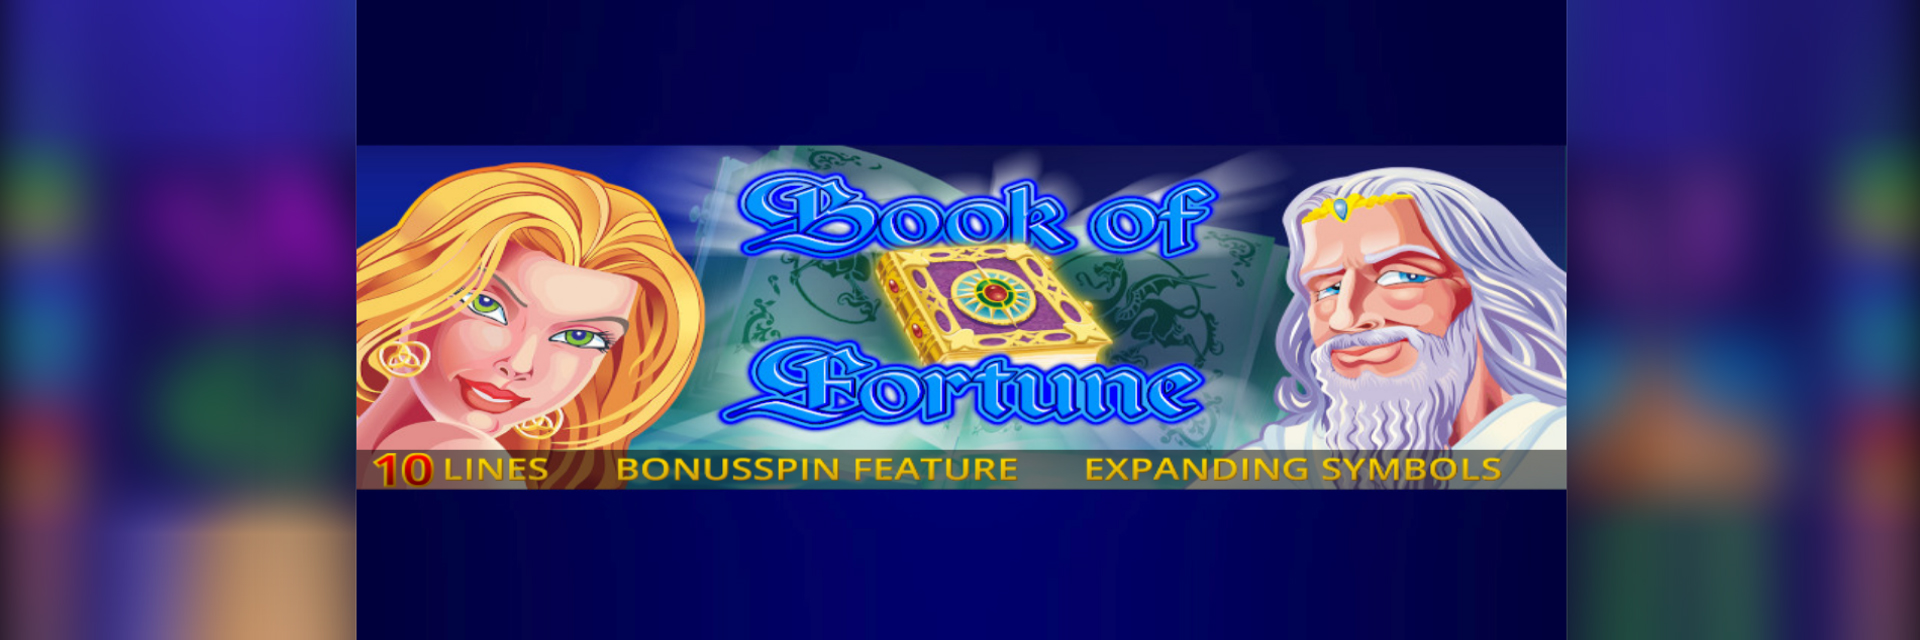 Book of Fortune slot.